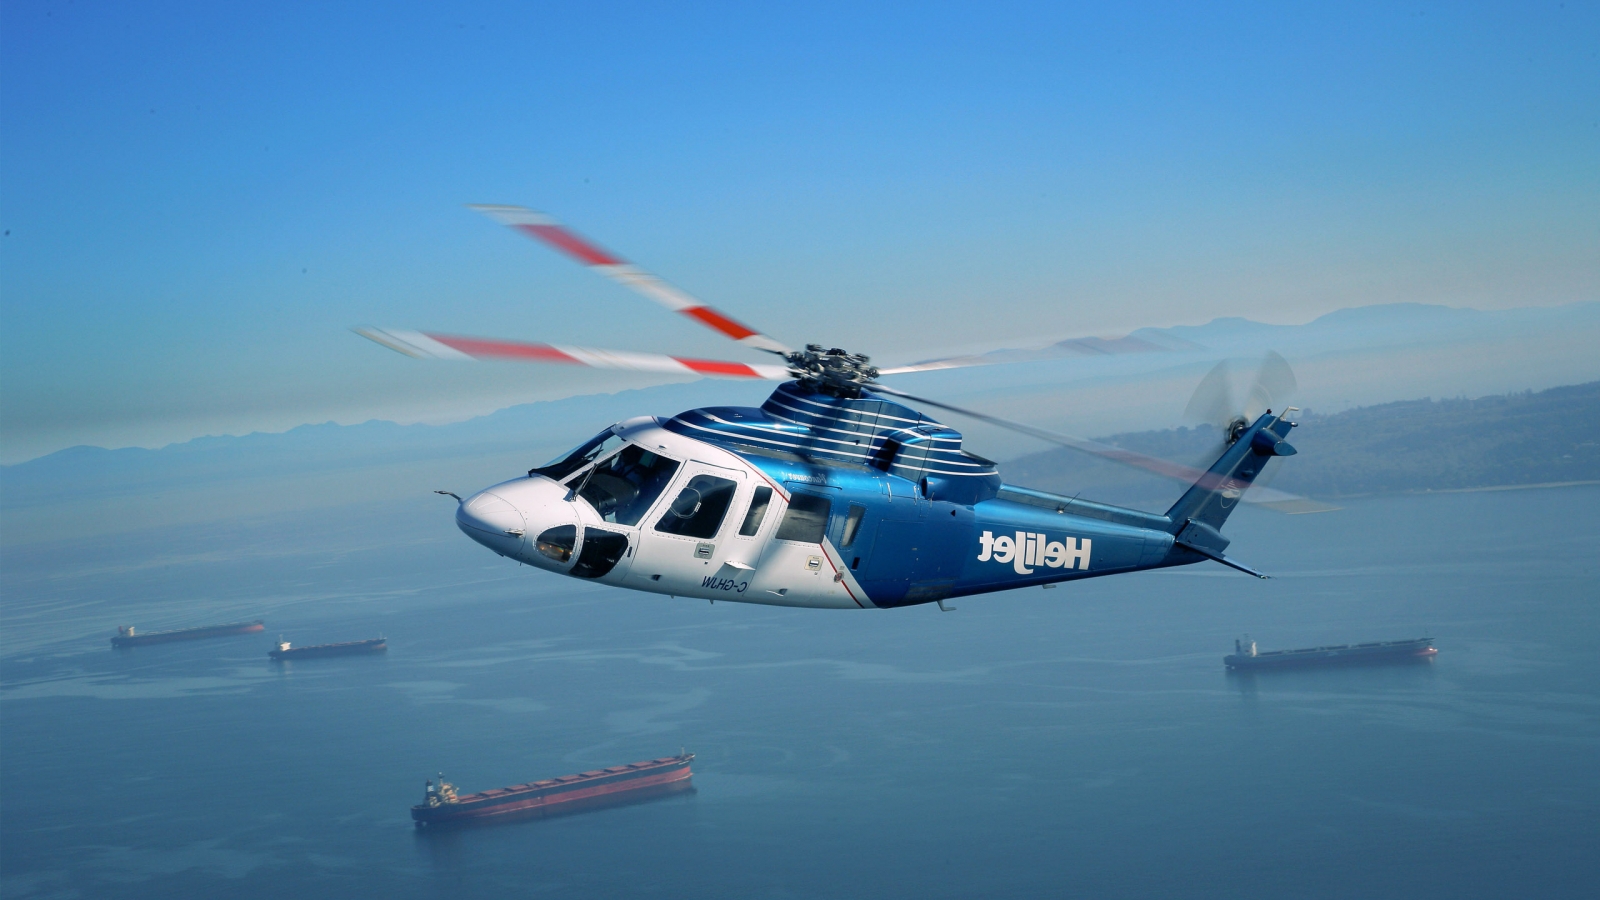 Hd helicopter wallpapers